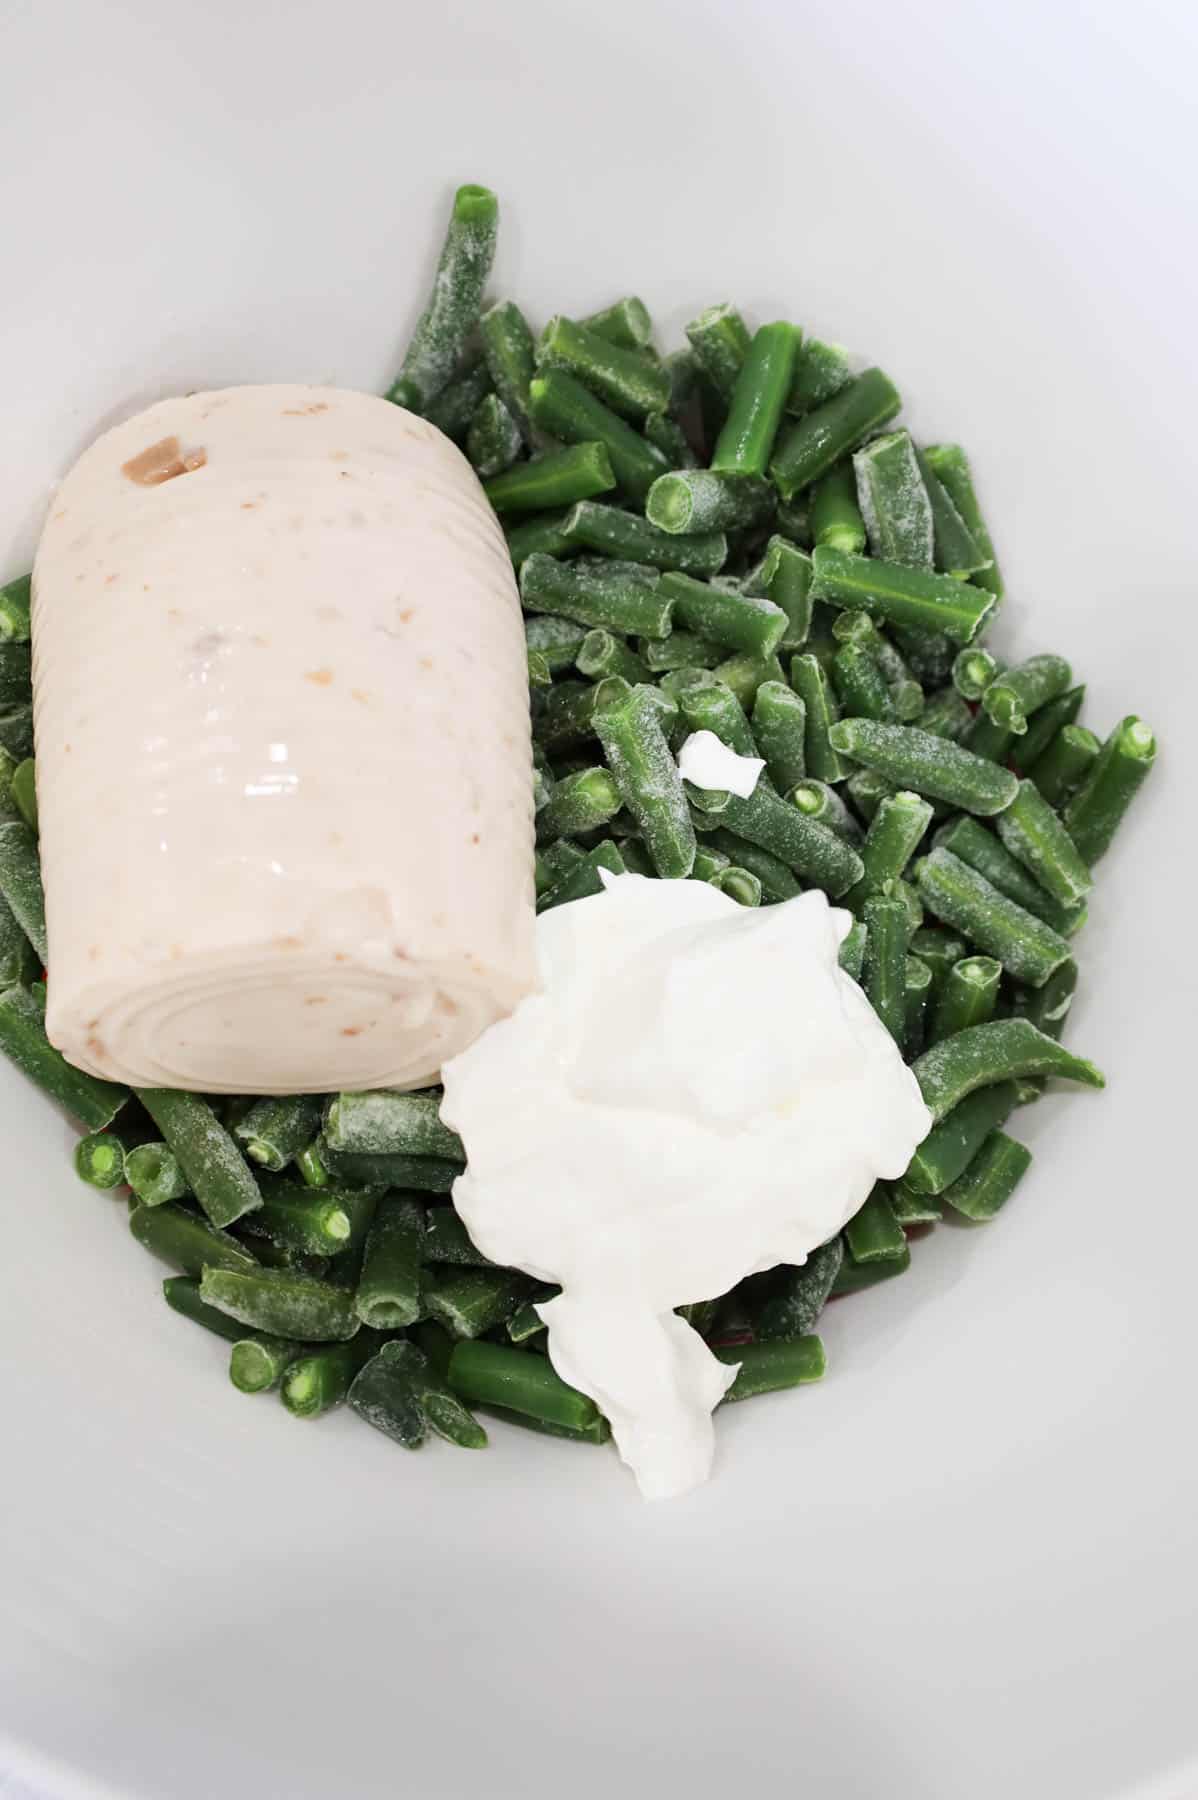 sour cream, cream of mushroom soup and cut green beans in a bowl